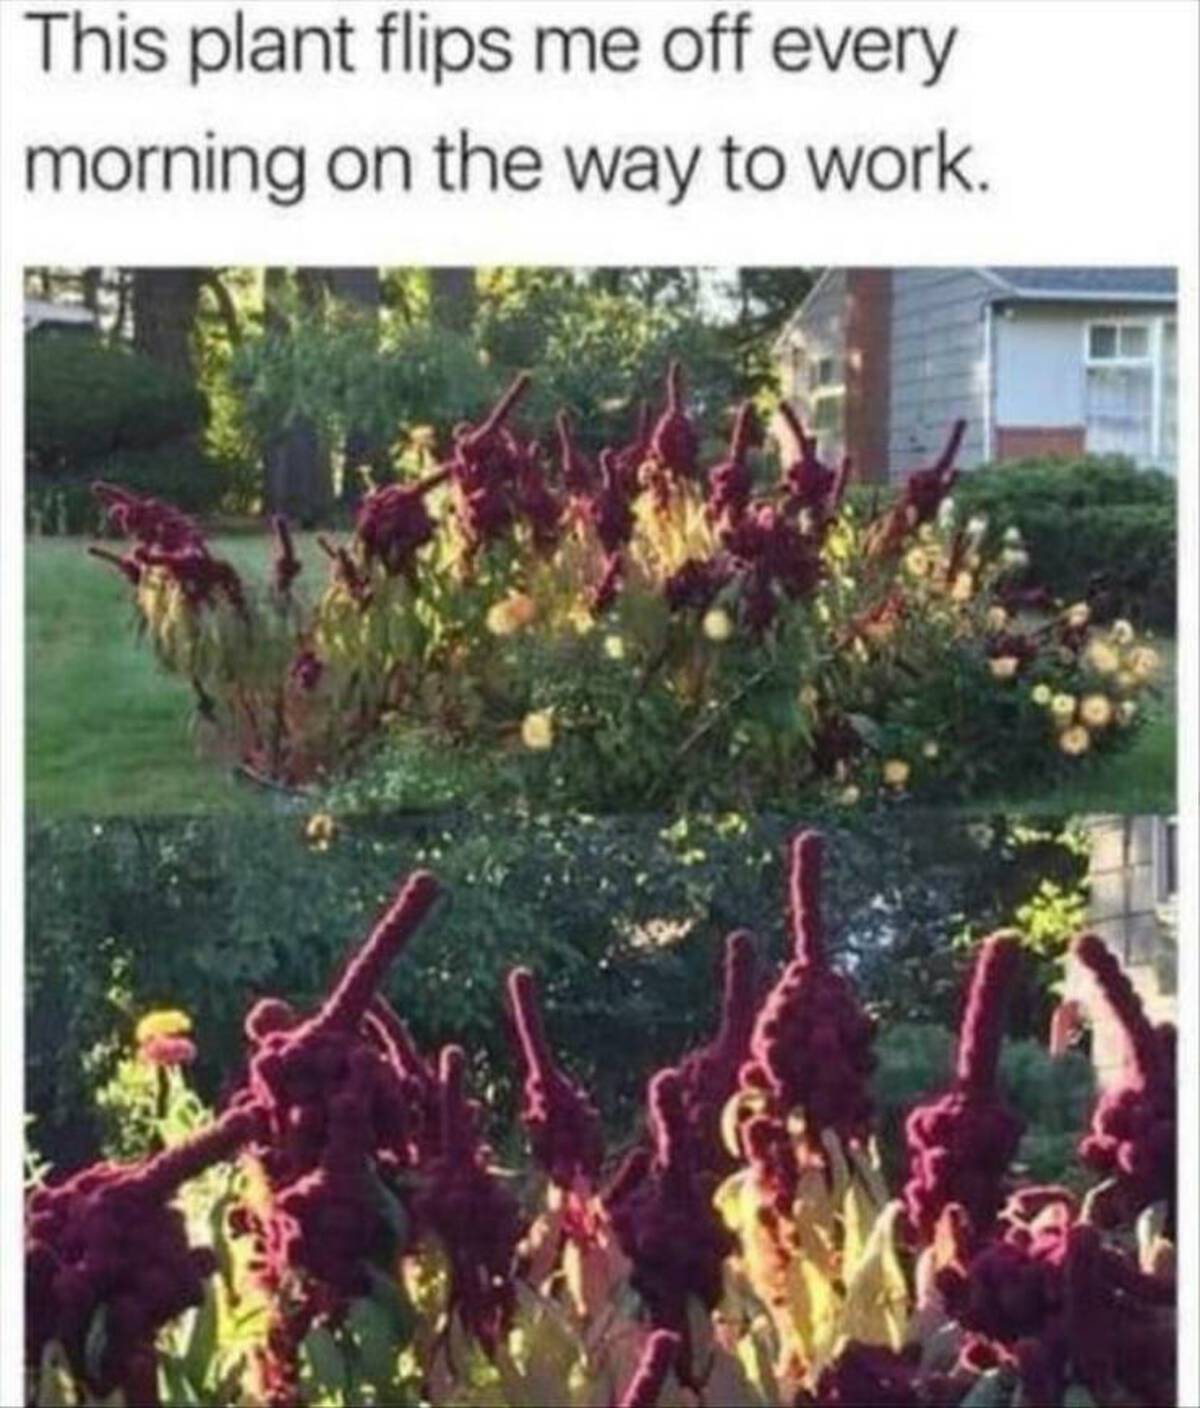 Internet meme - This plant flips me off every morning on the way to work.